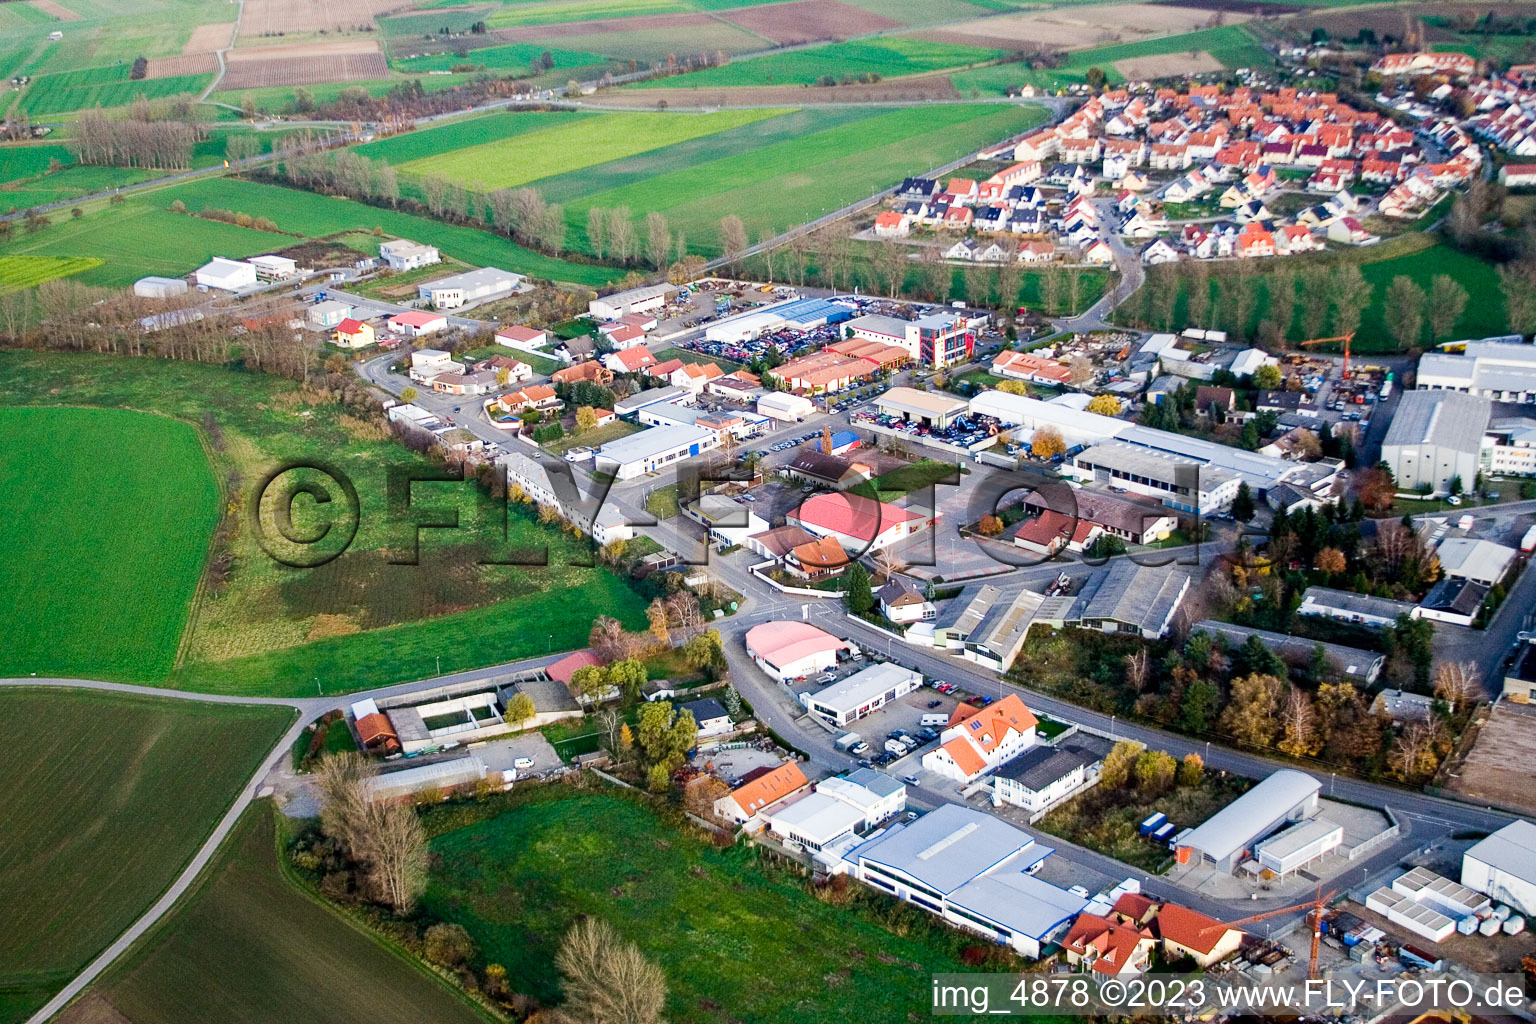 Aerial view of From the southwest in Hockenheim in the state Baden-Wuerttemberg, Germany